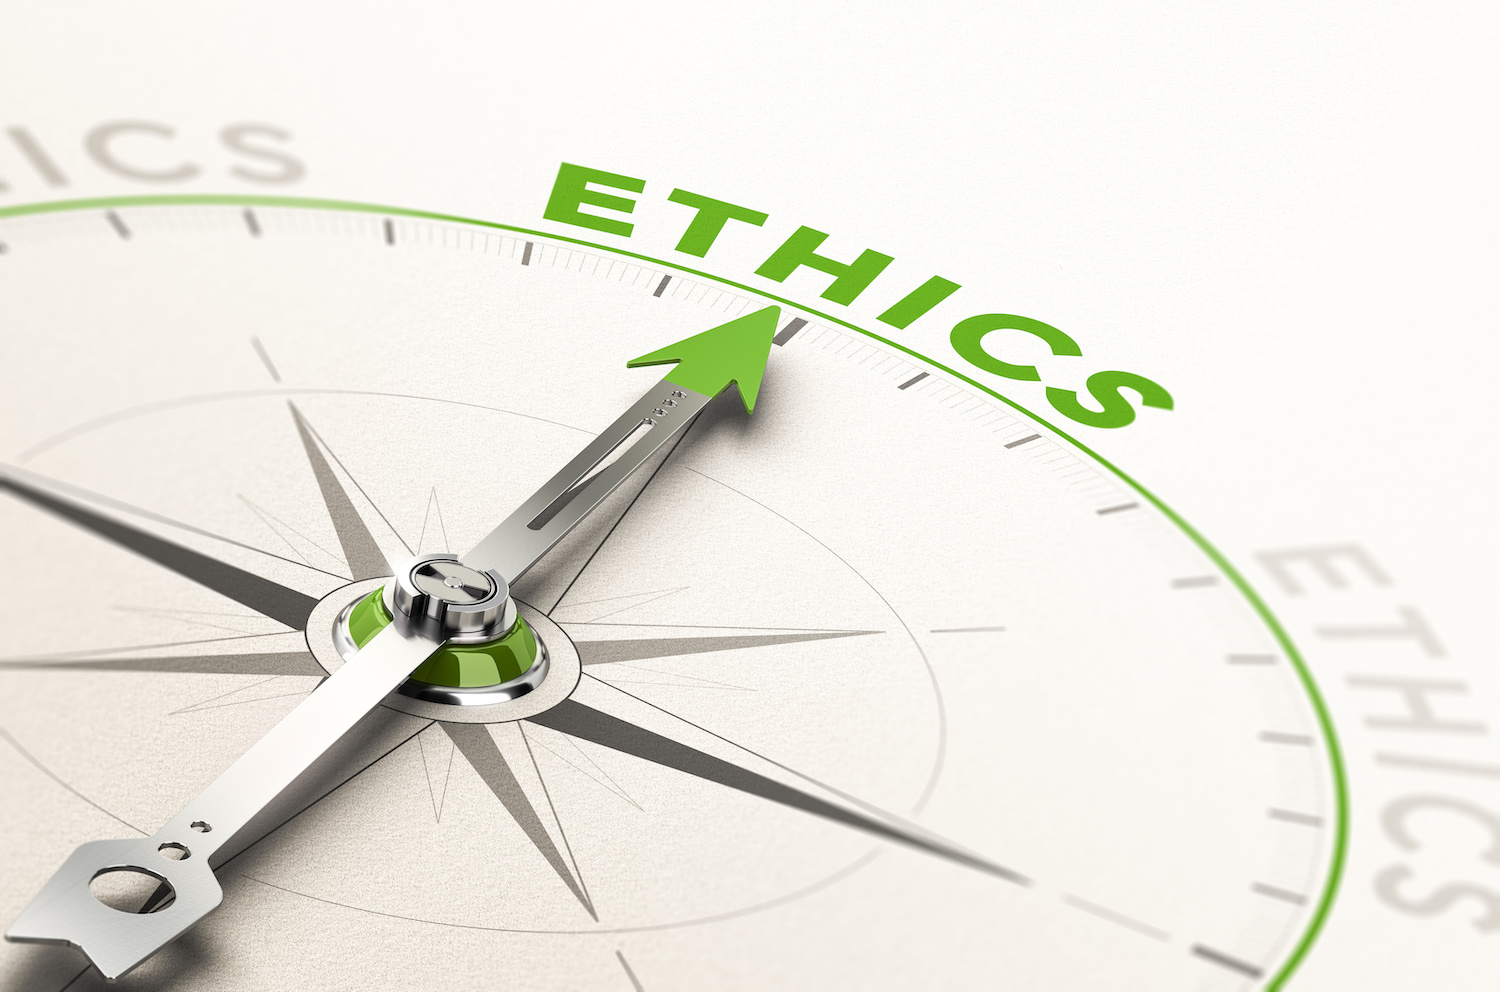 compass with needle pointing the word ethics. 1500 x 992